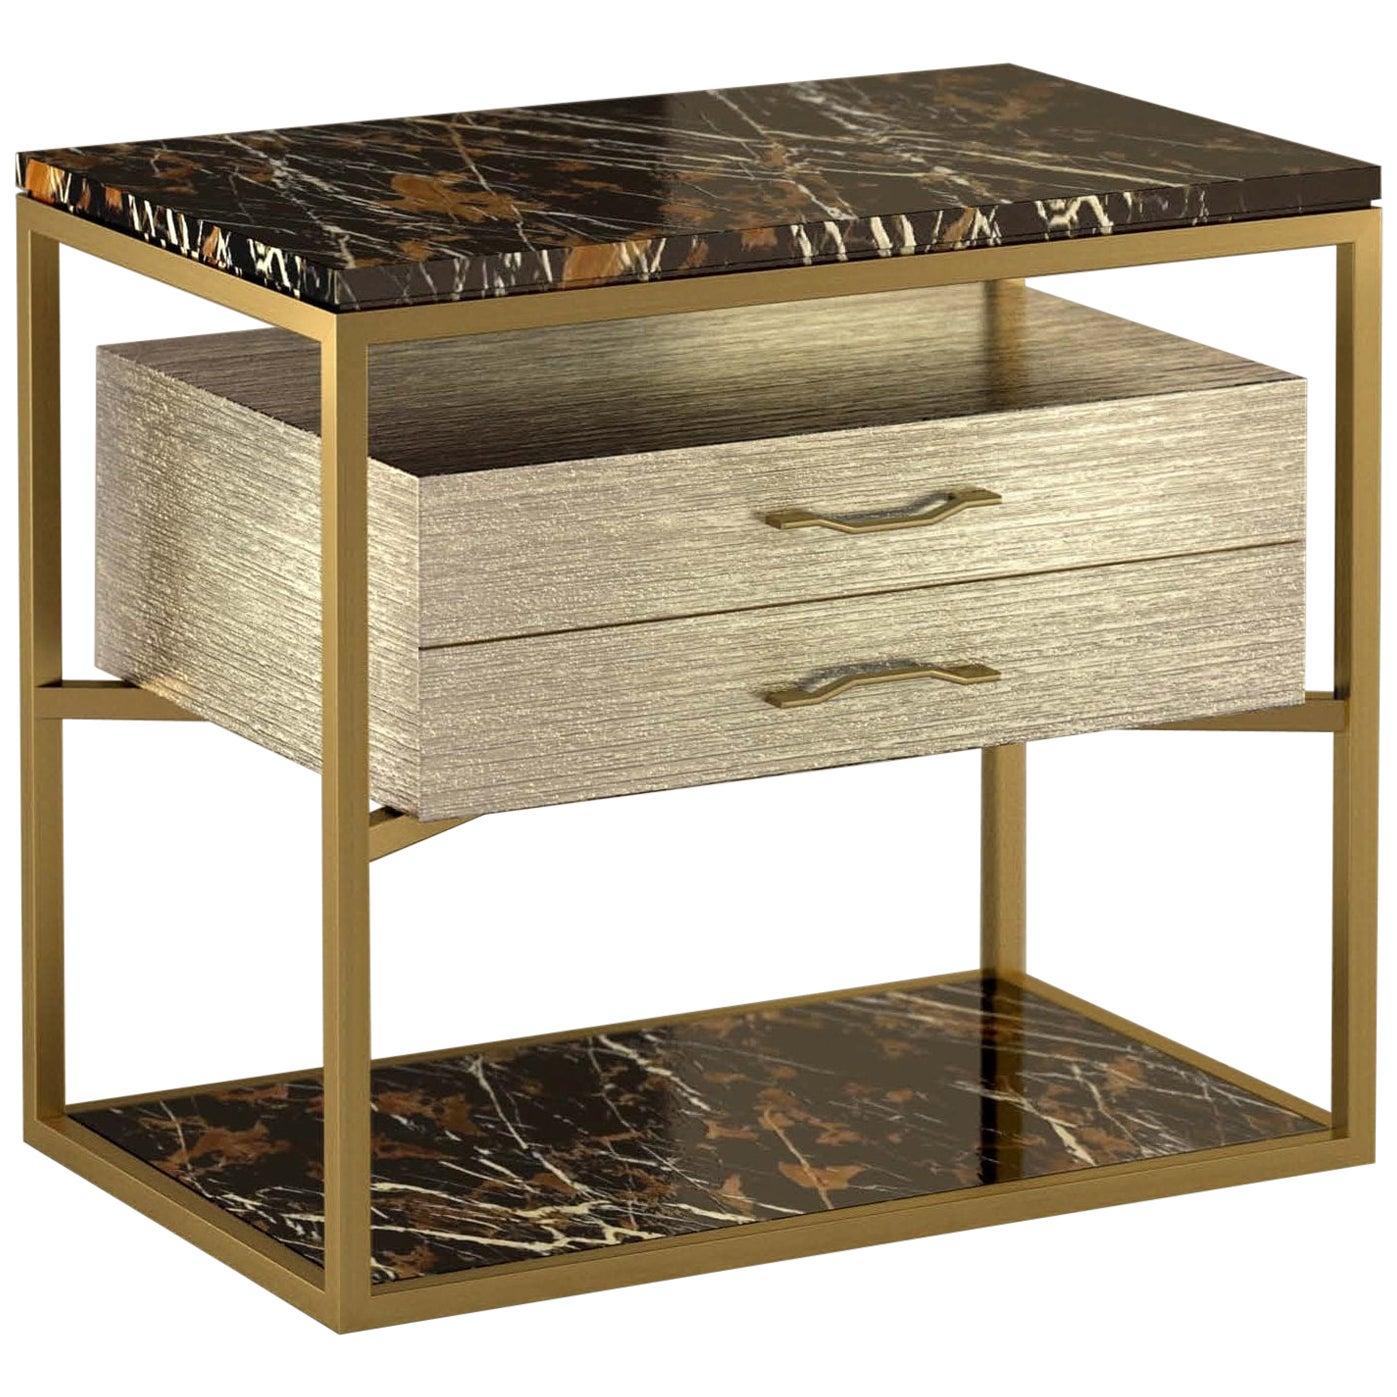 Giovannozzi Home, Bedside Table "Garbo" Black Marble and Metal Brass Finish-Italy For Sale